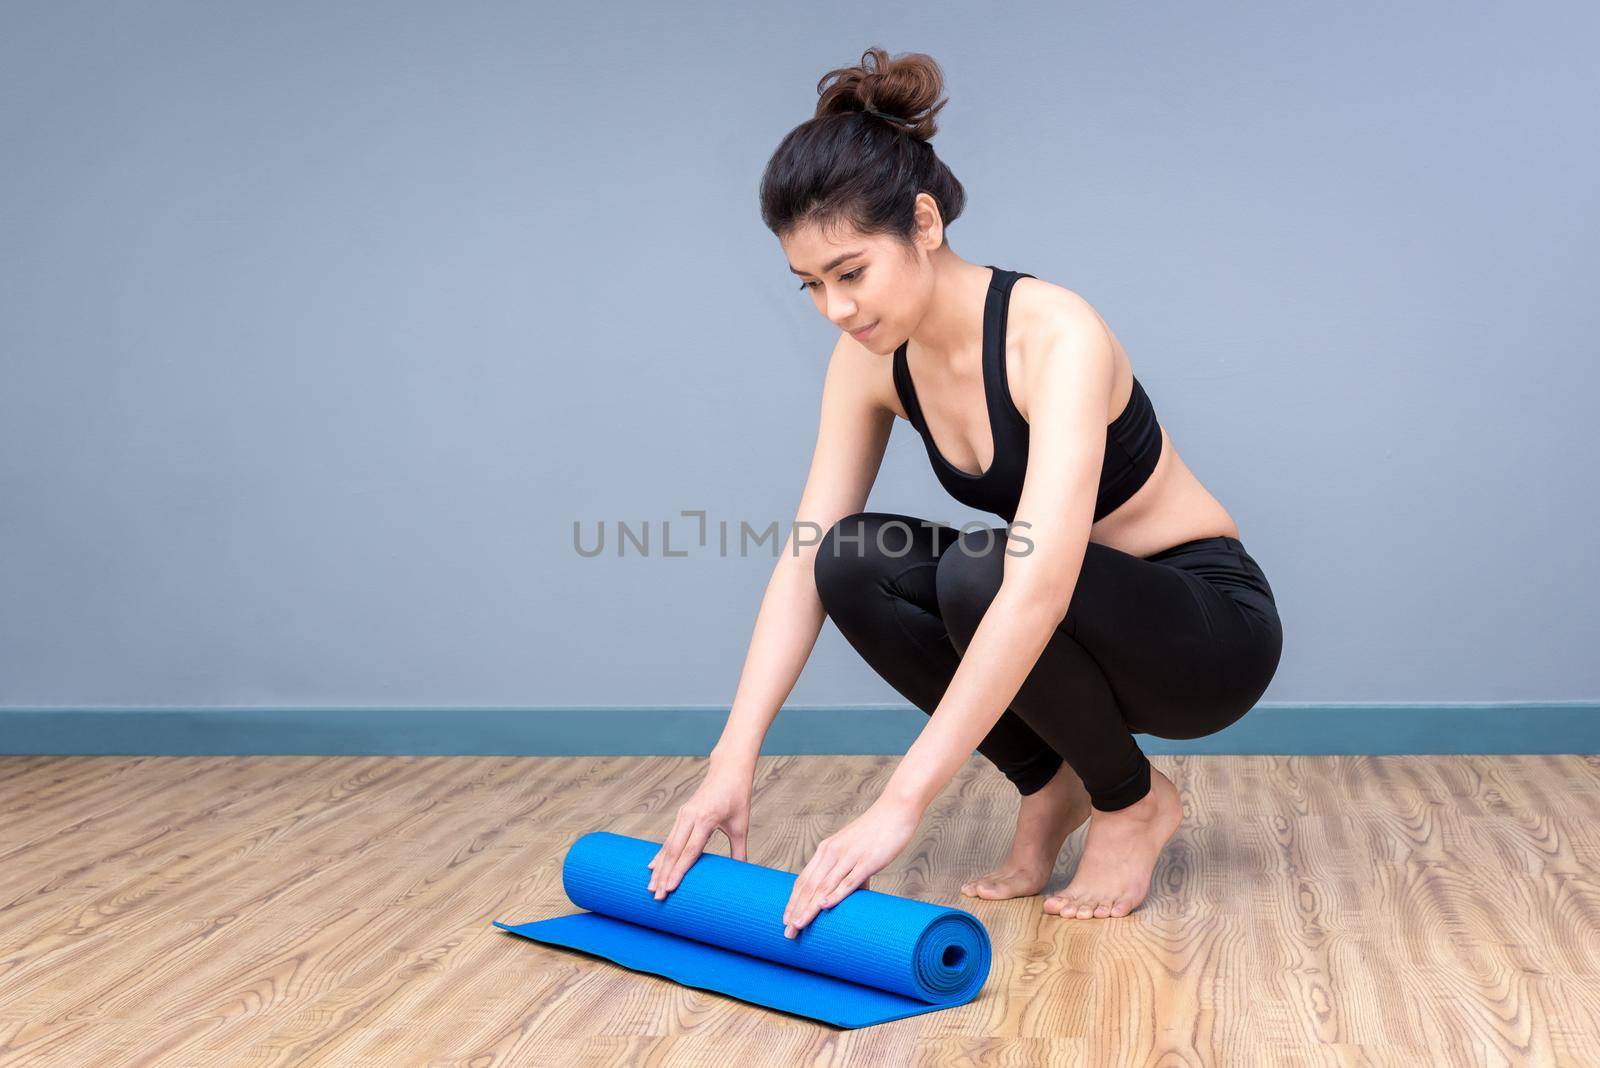 Healthy woman exercising yoga at sport gym, girl doing sport indoor.Photo design for fitness sporty woman and healthcare concept.